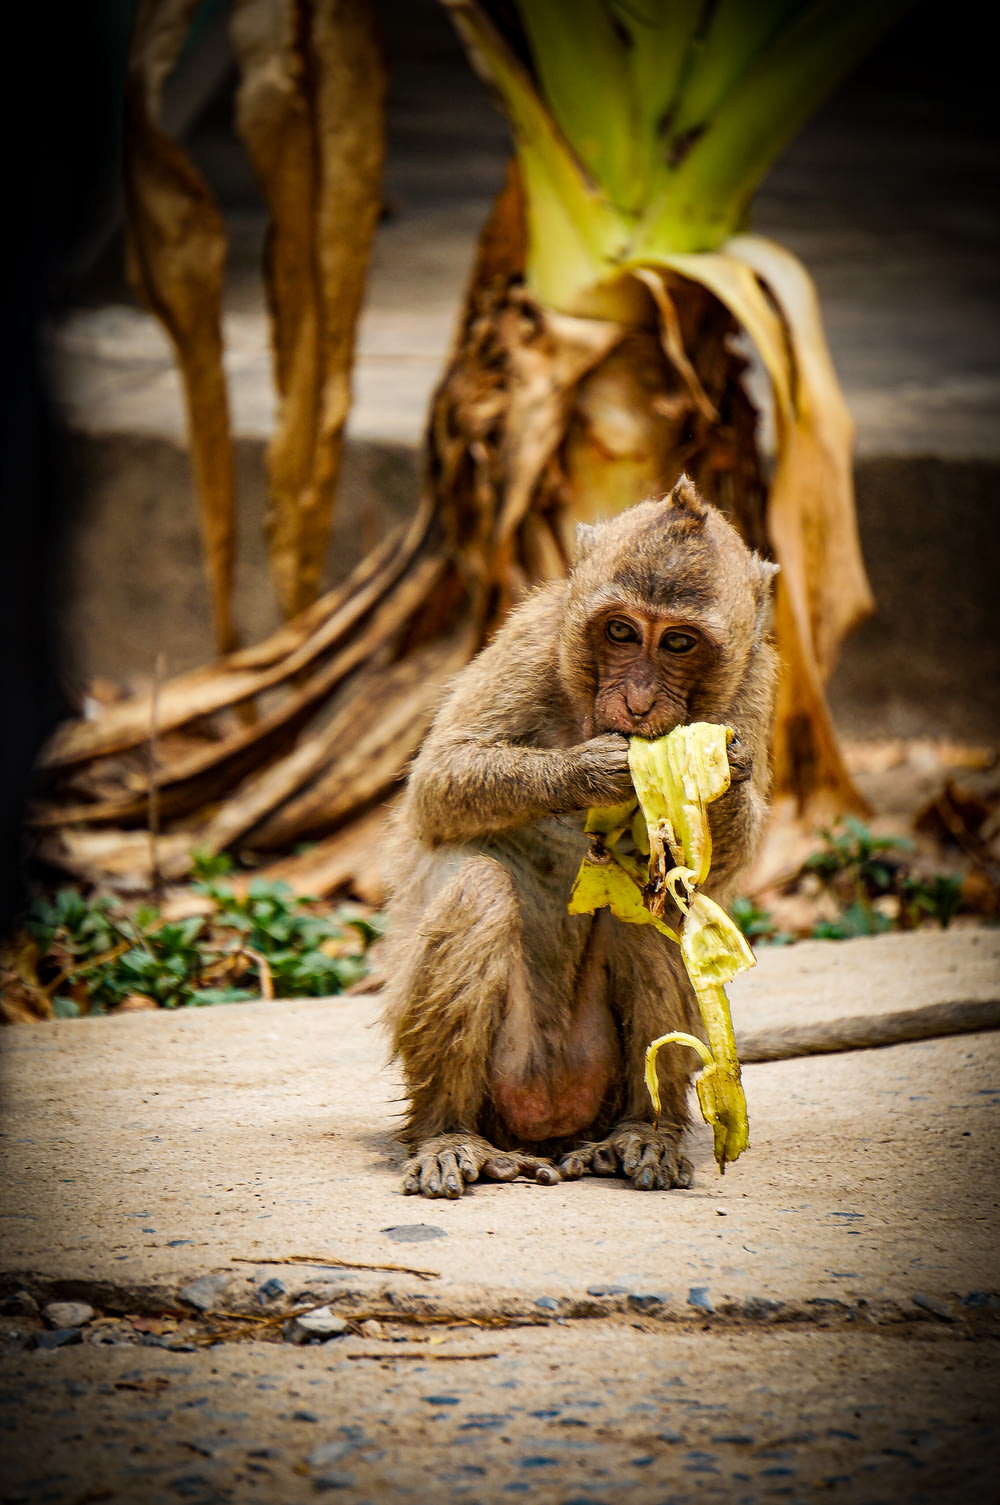 a monkey sitting on the ground eating a banana